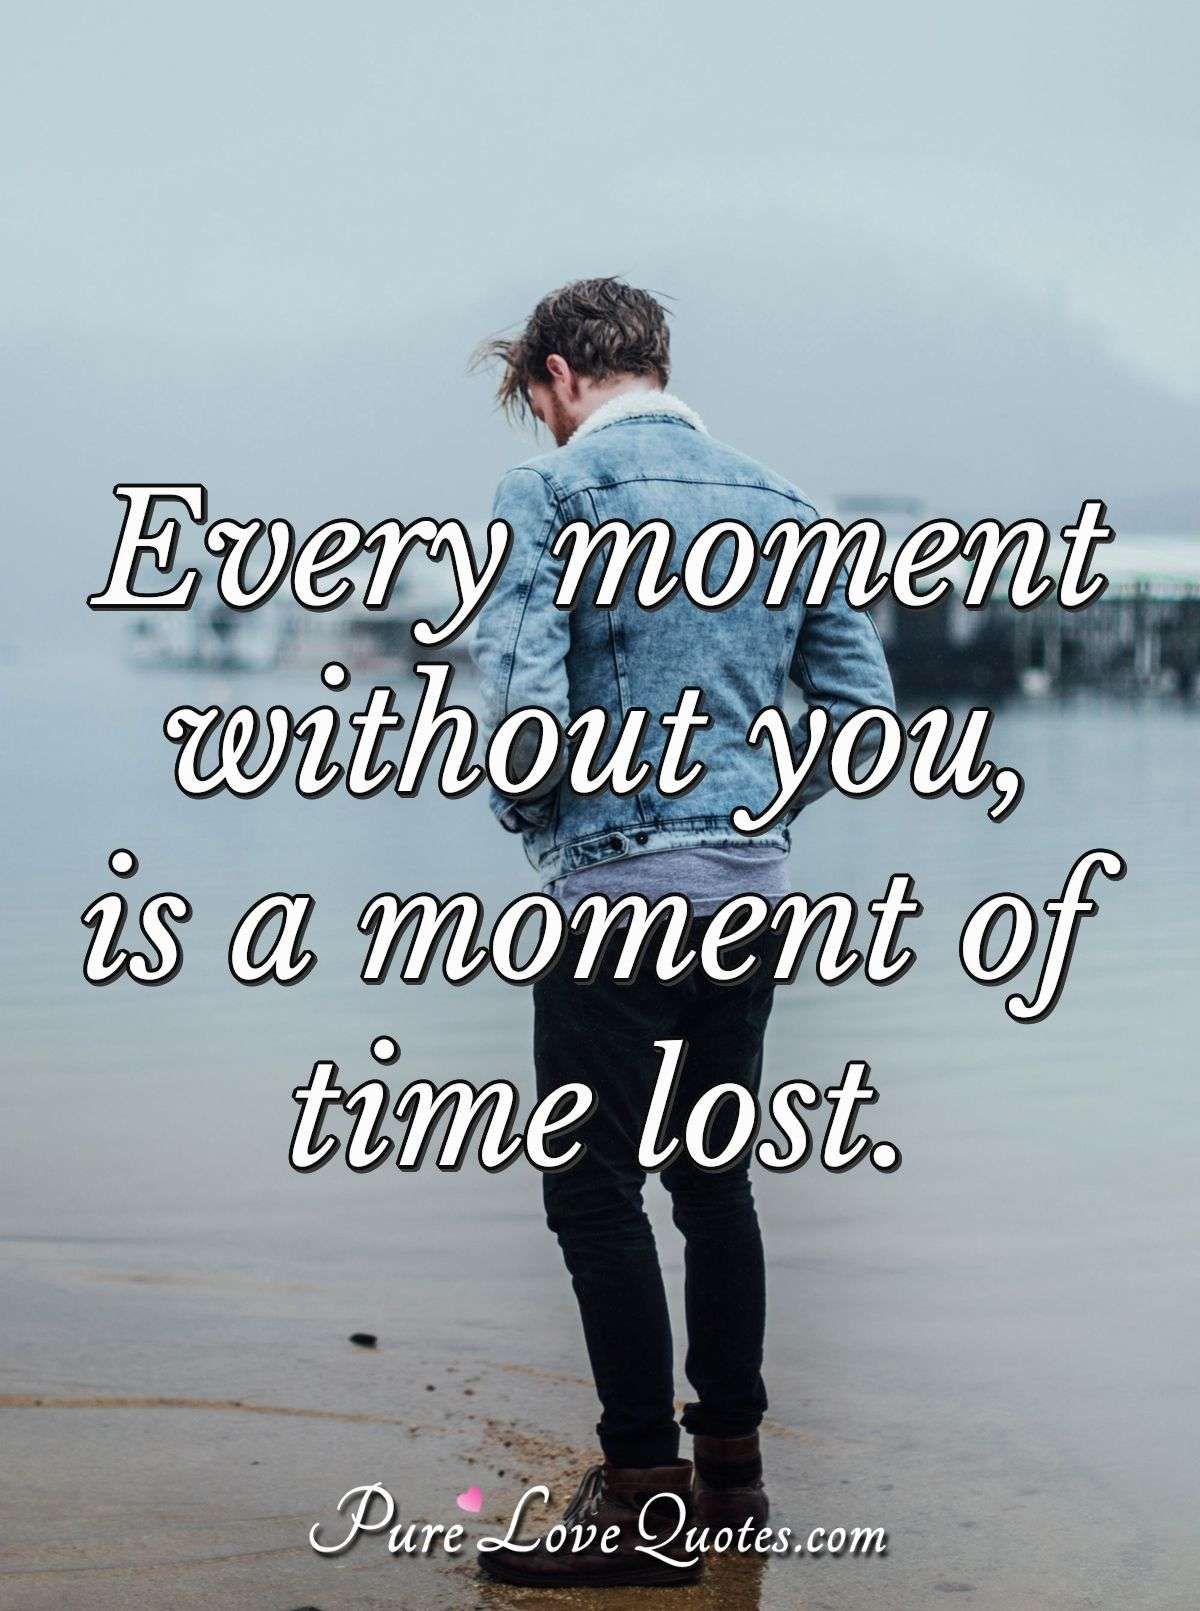 Every moment without you, is a moment of time lost. - Anonymous